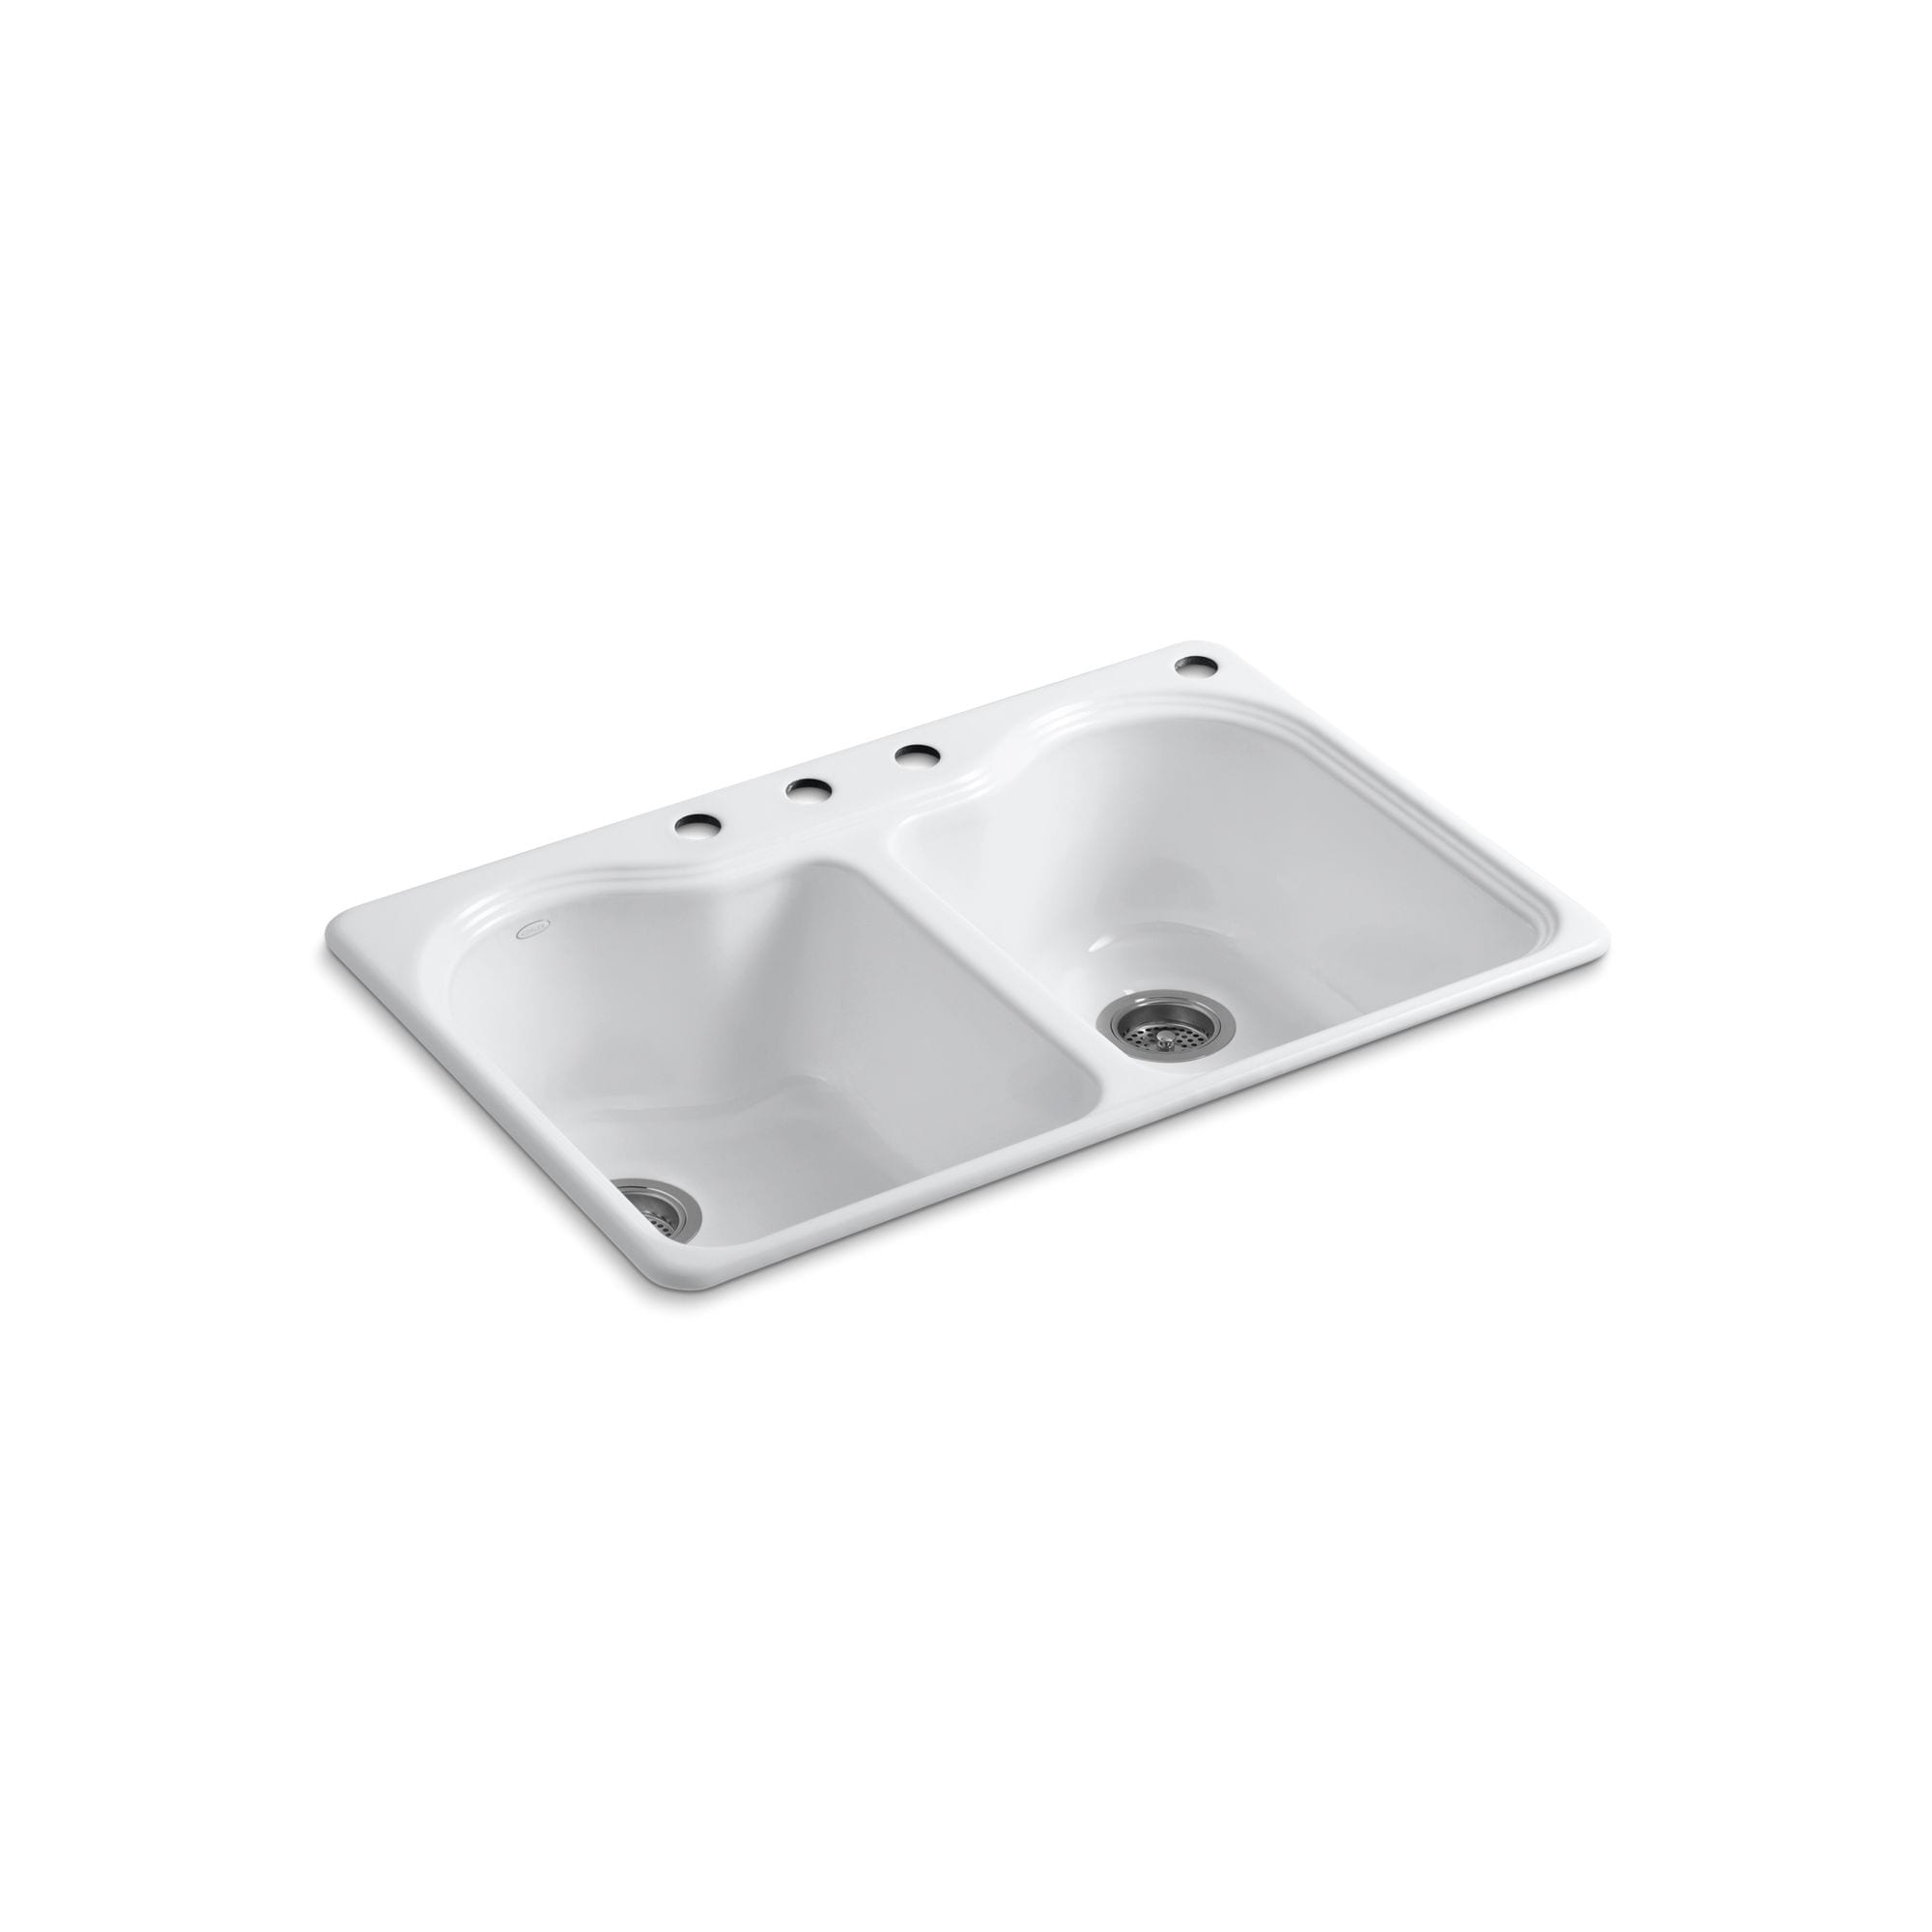 Shop Black Friday Deals On Kohler Hartland 33 X 22 X 9 5 8 Top Mount Double Equal Kitchen Sink With 4 Faucet Holes White K 5818 4 0 On Sale Overstock 31416201